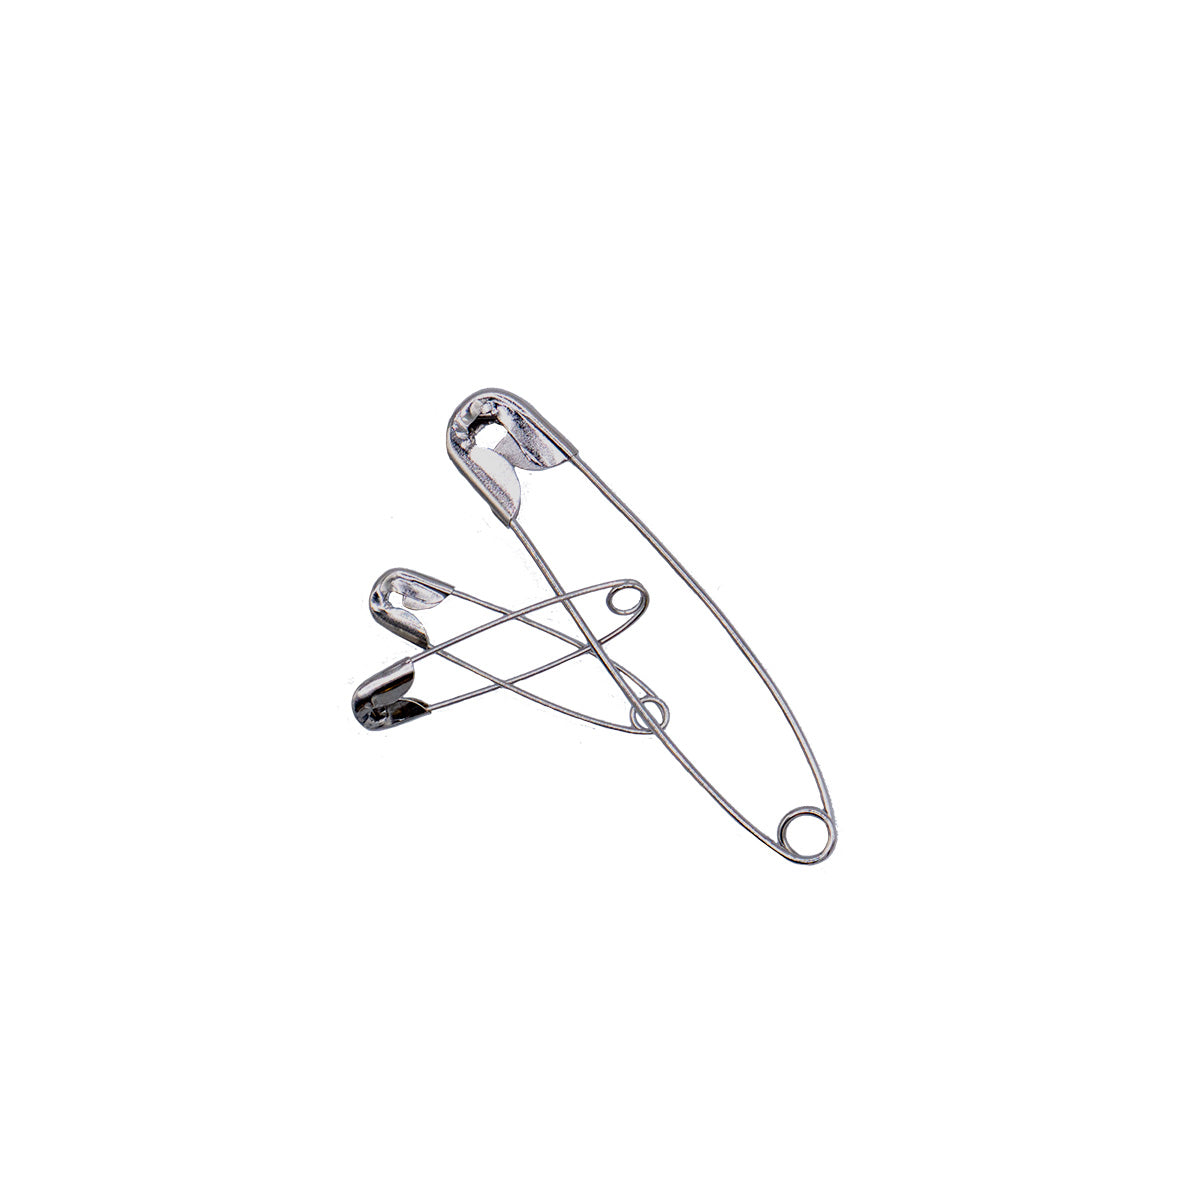 Three safety pins of assorted sizes: one large and two small.